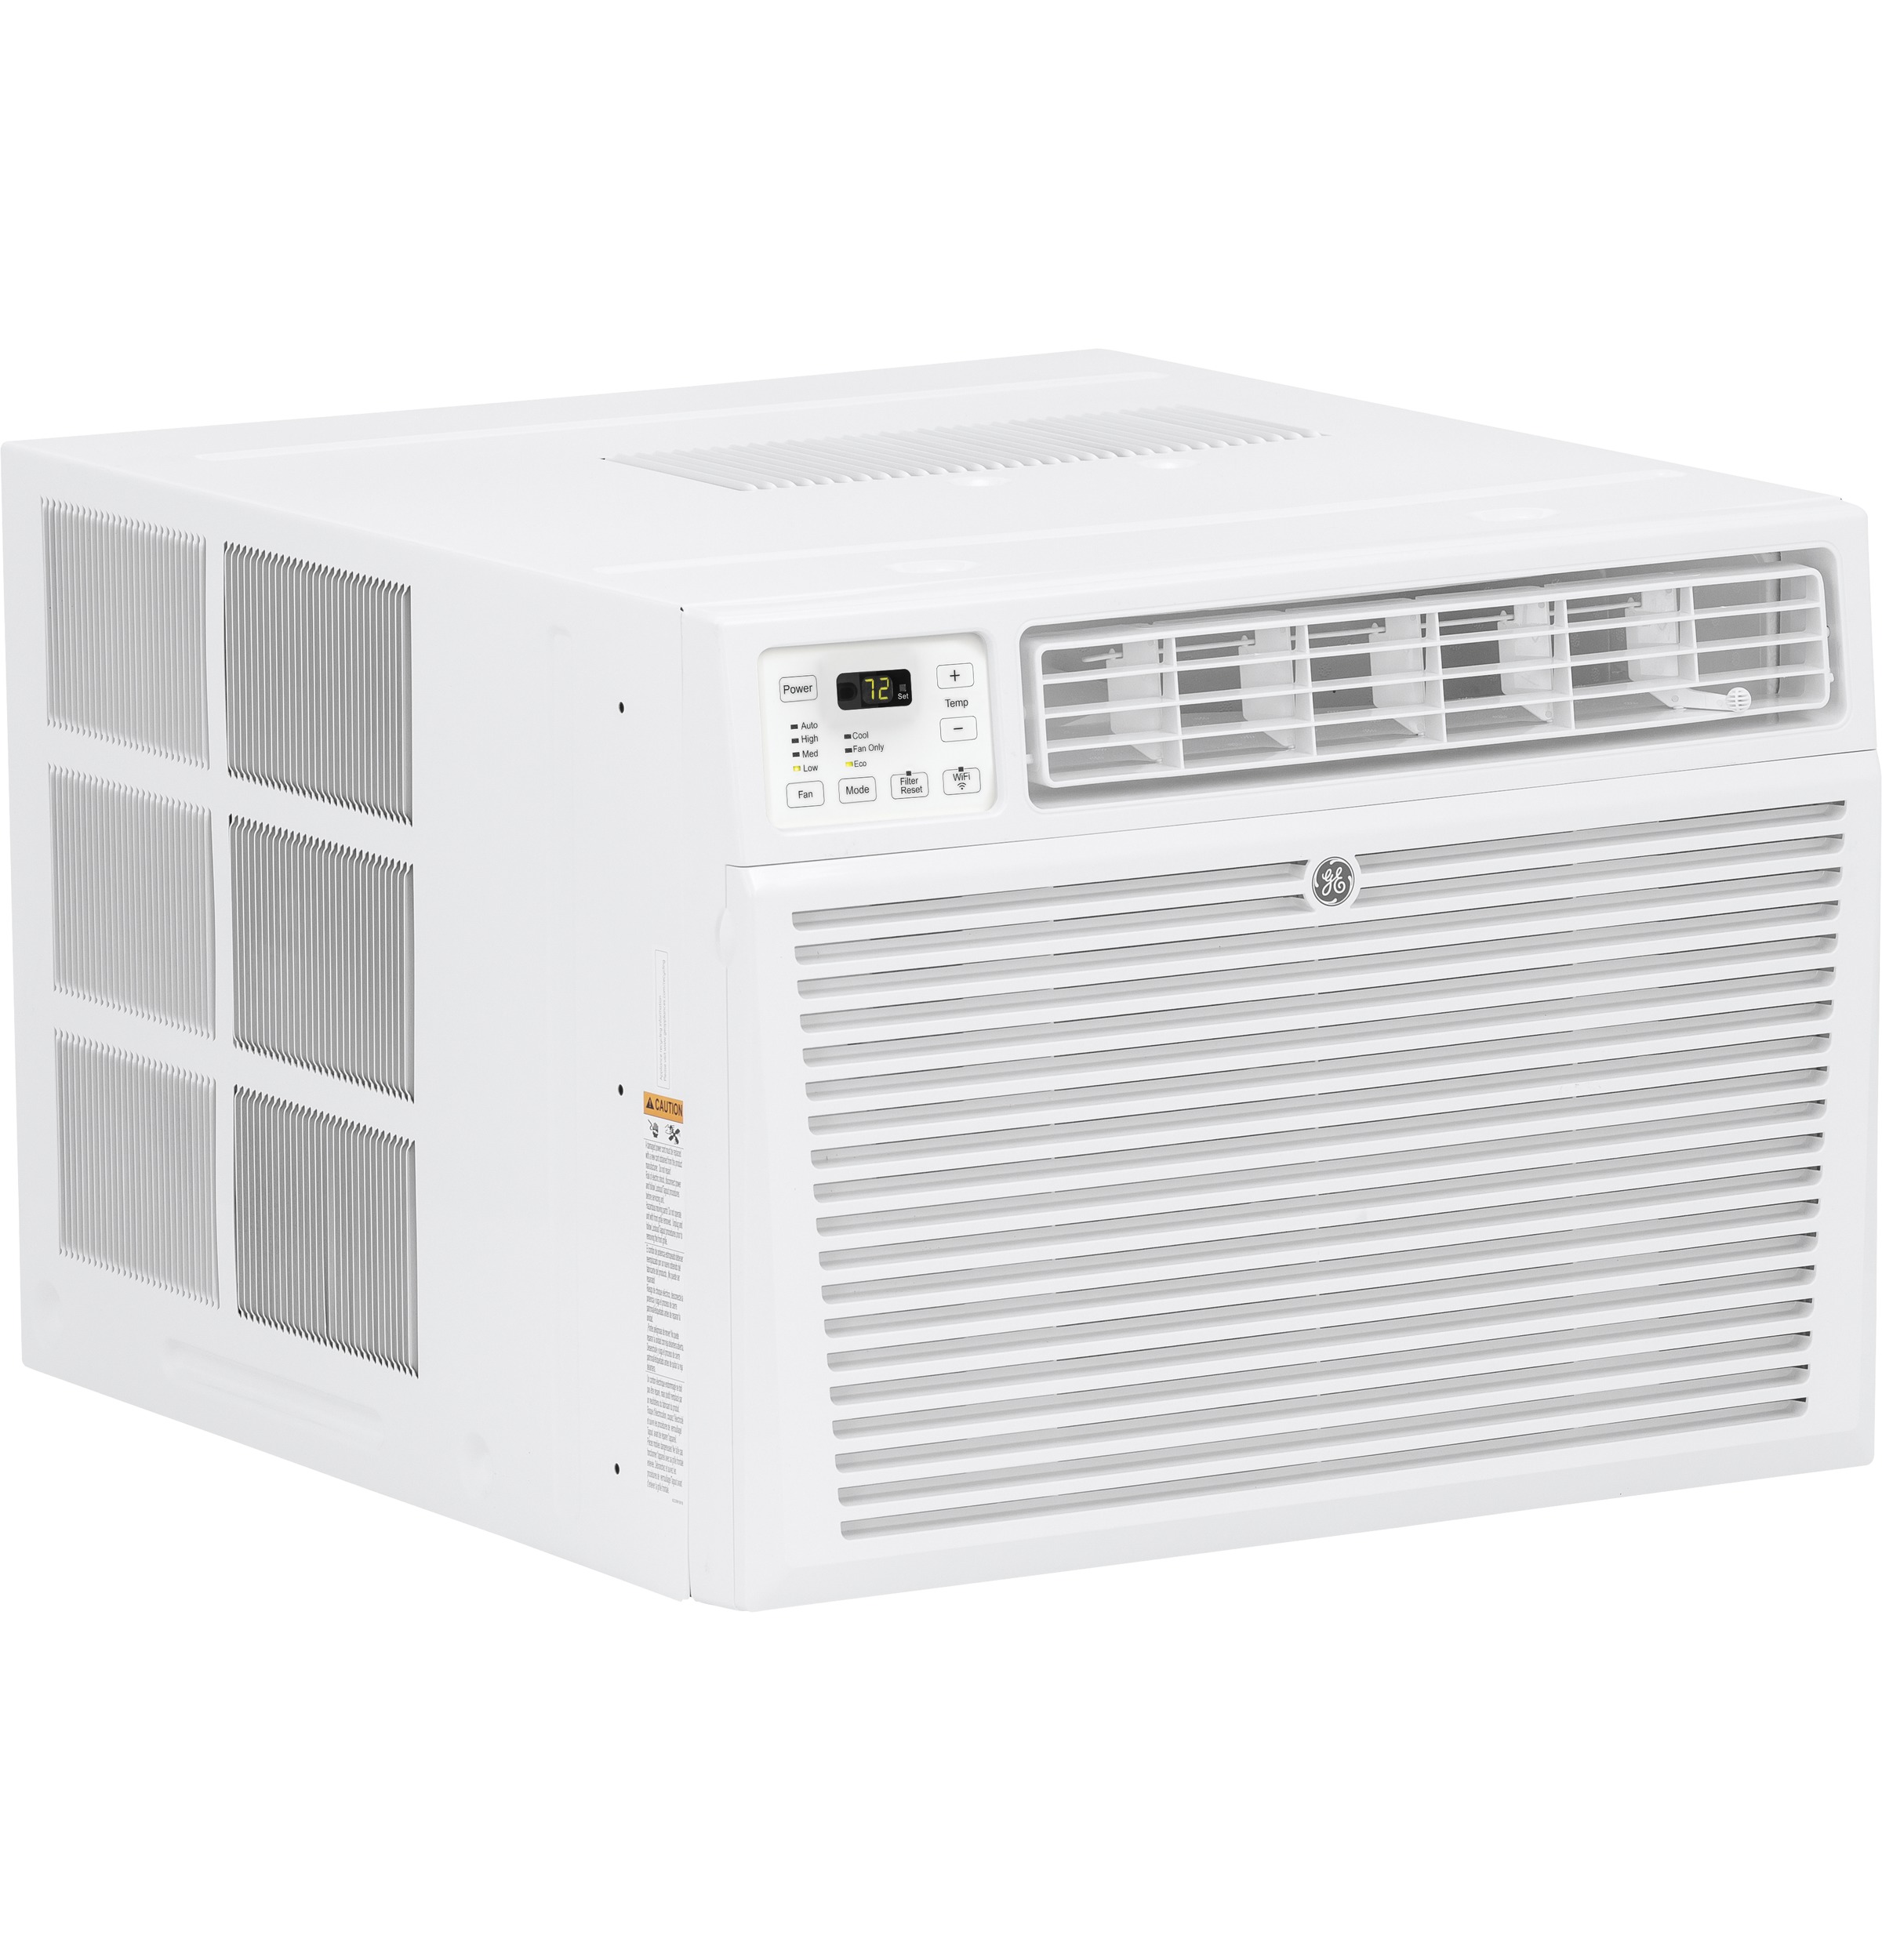 GE® ENERGY STAR® 230 Volt Smart Electronic Room Air Conditioner